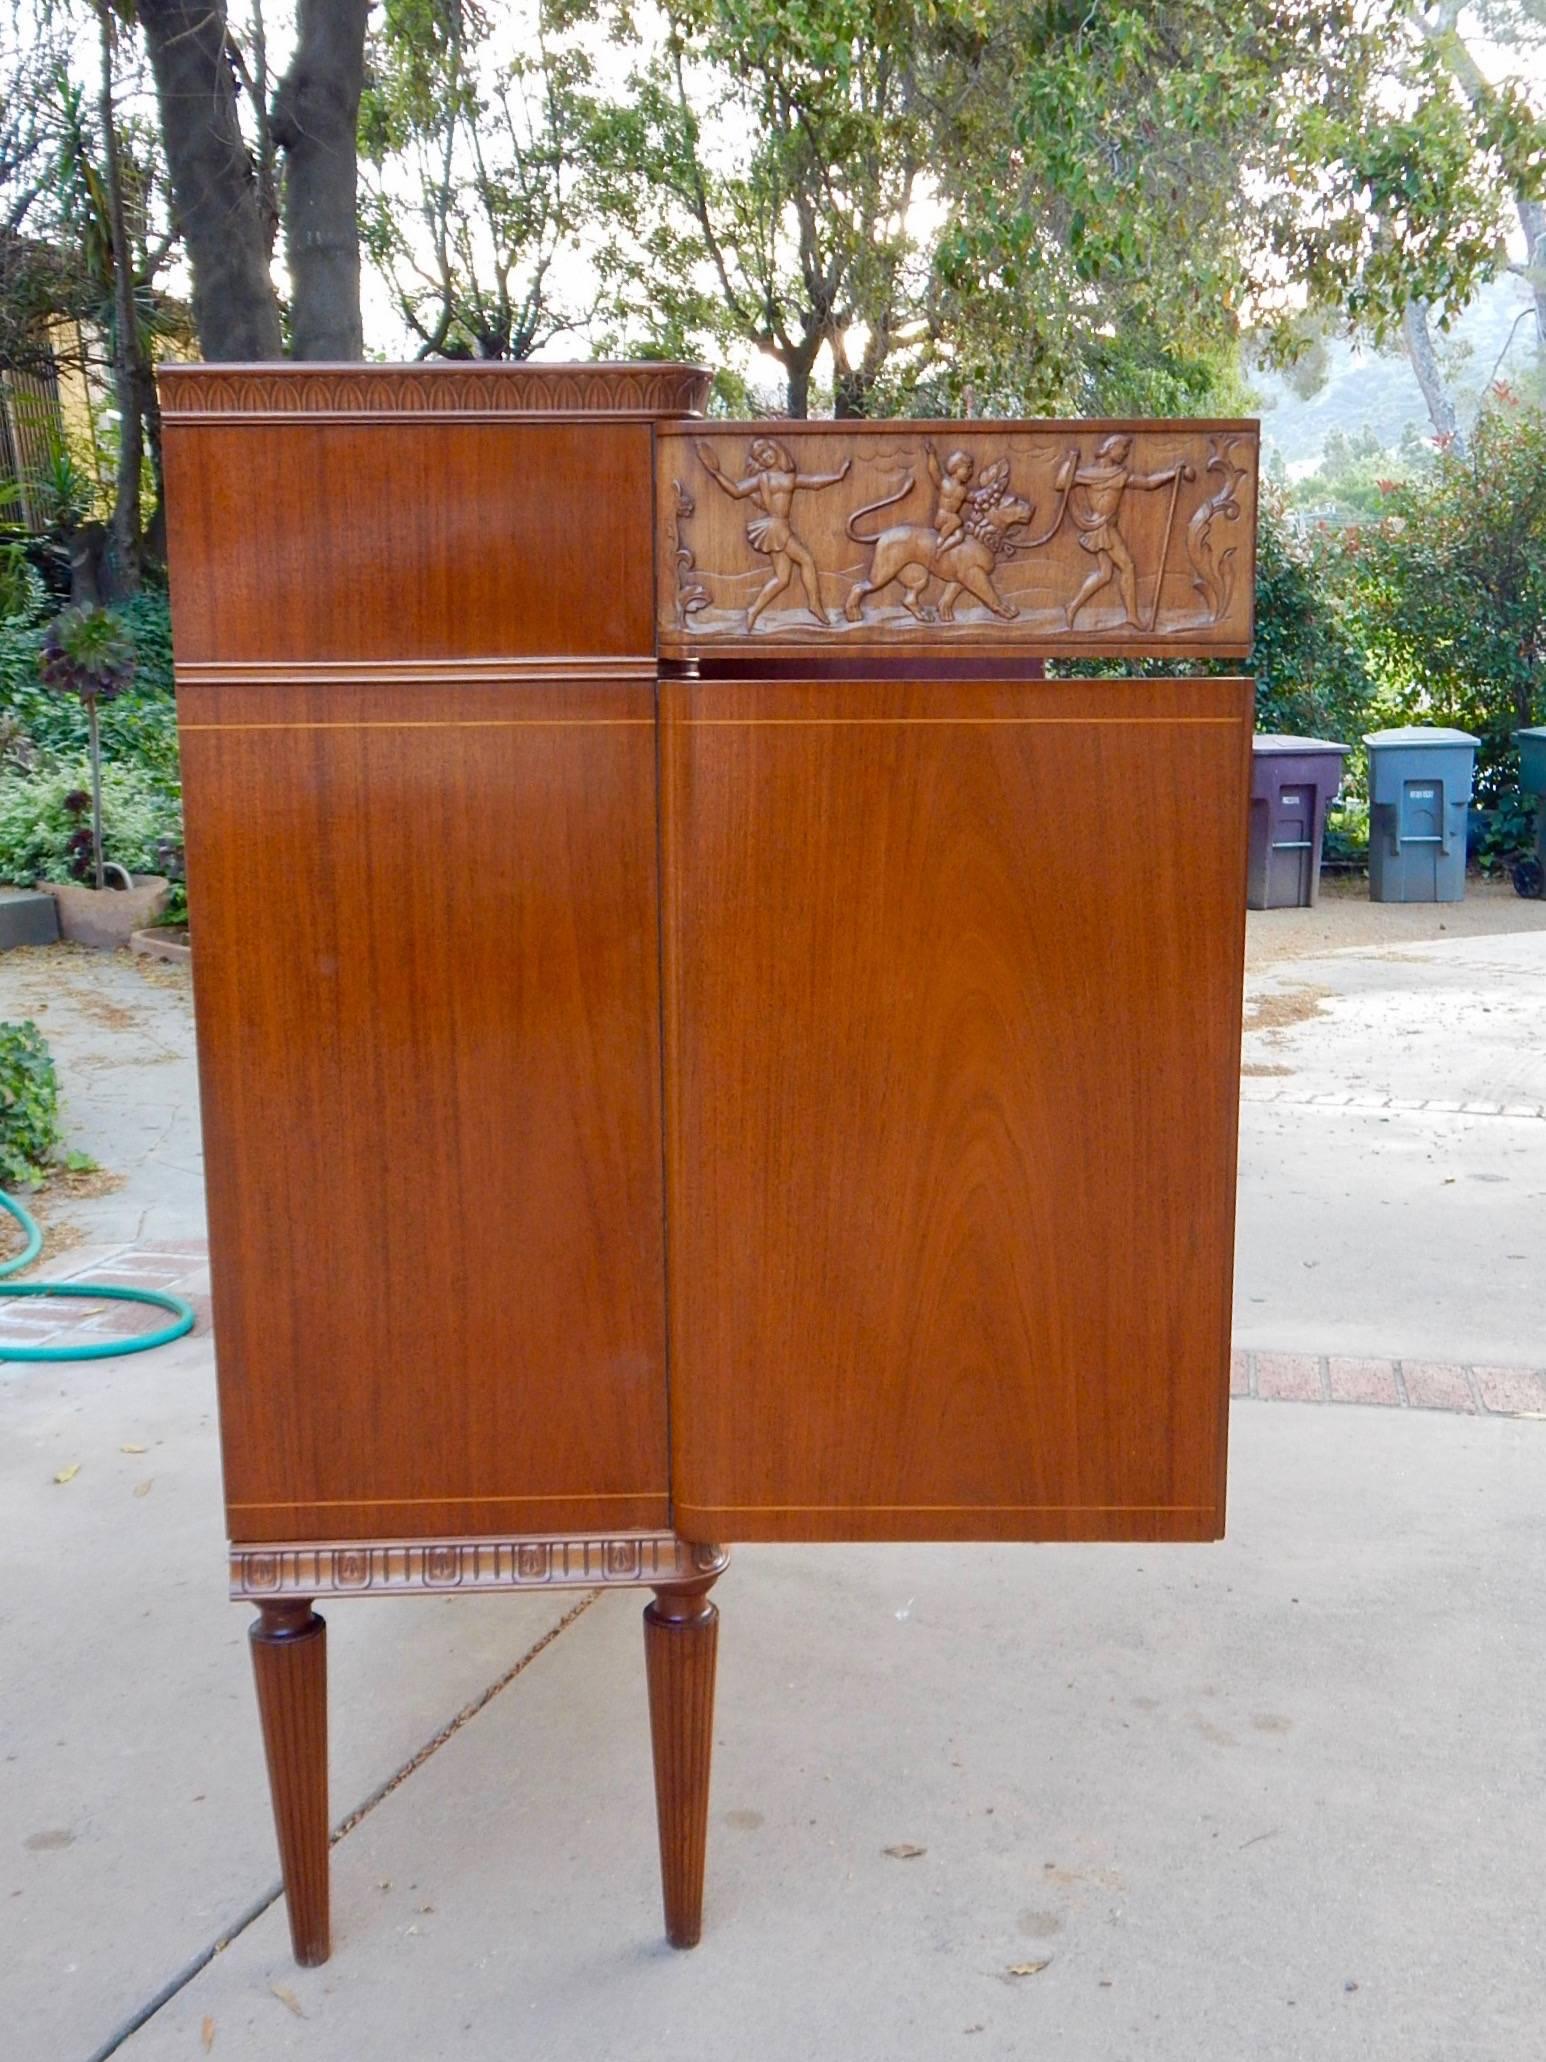 Swedish, 1940s Moderne Storage Cabinet with Figural Relief by Eugene Höglund For Sale 1